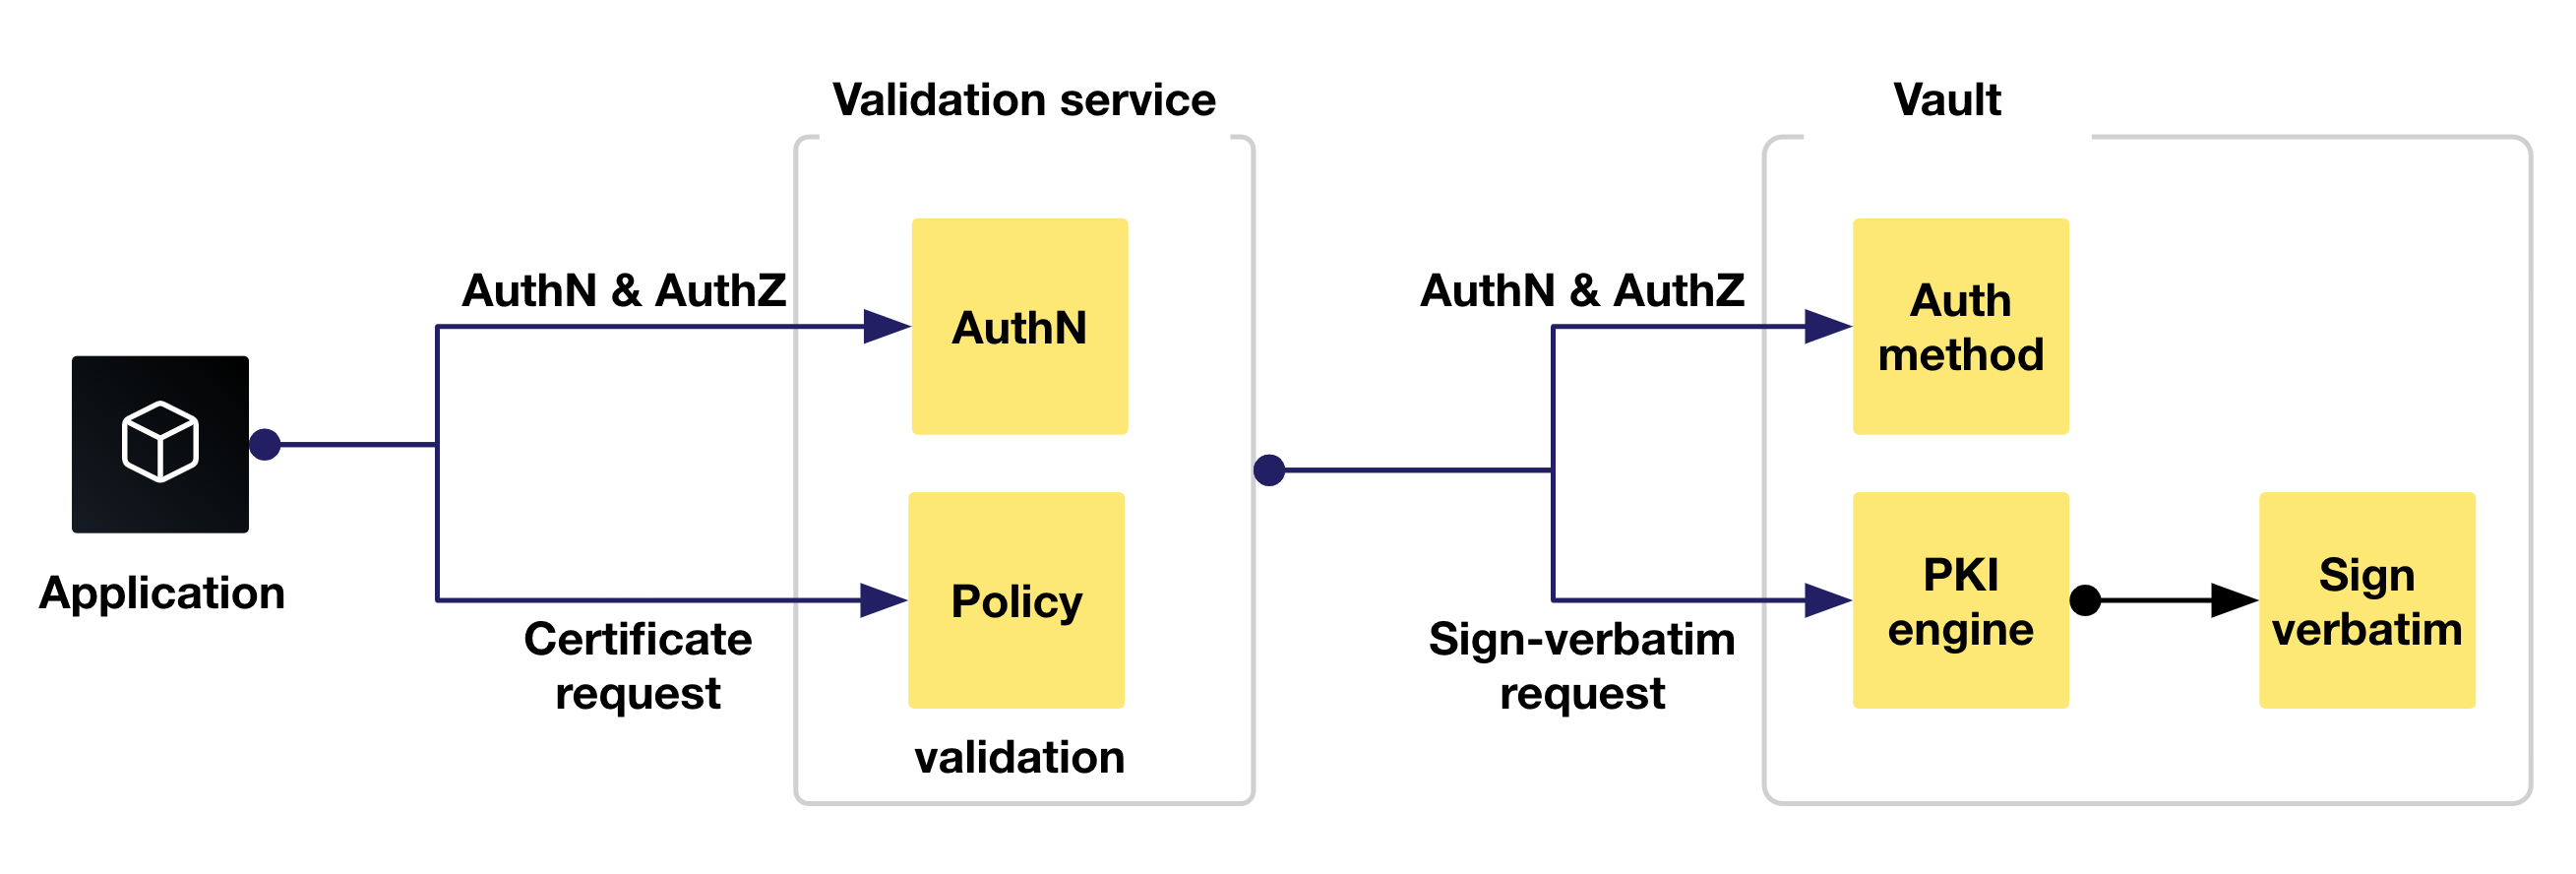 The validation process for sign-verbatim requests